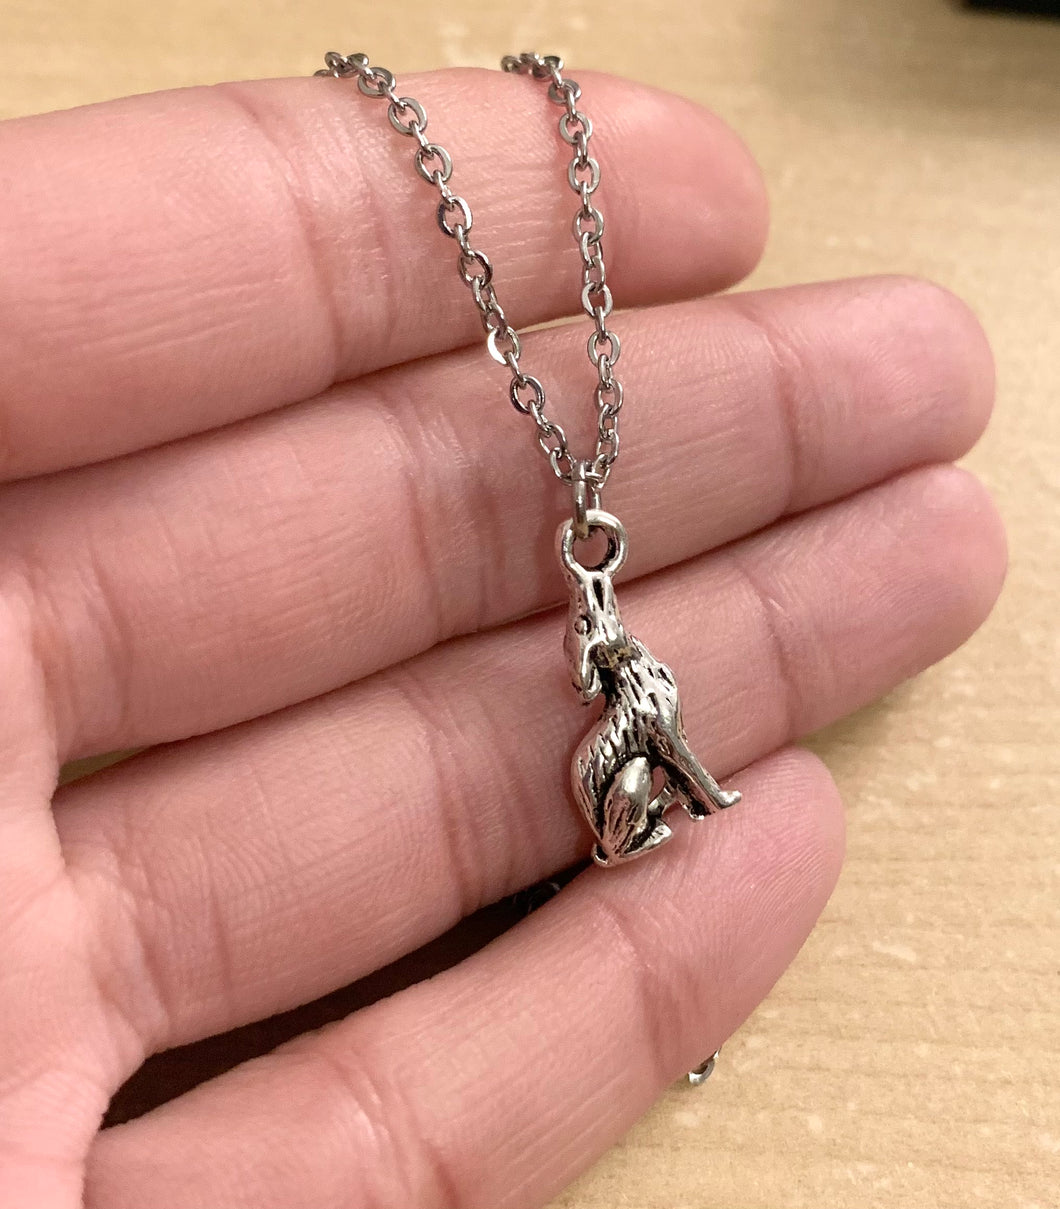 Wolf Spirit Animal Necklace - stainless steel chain with Howling wolf charm